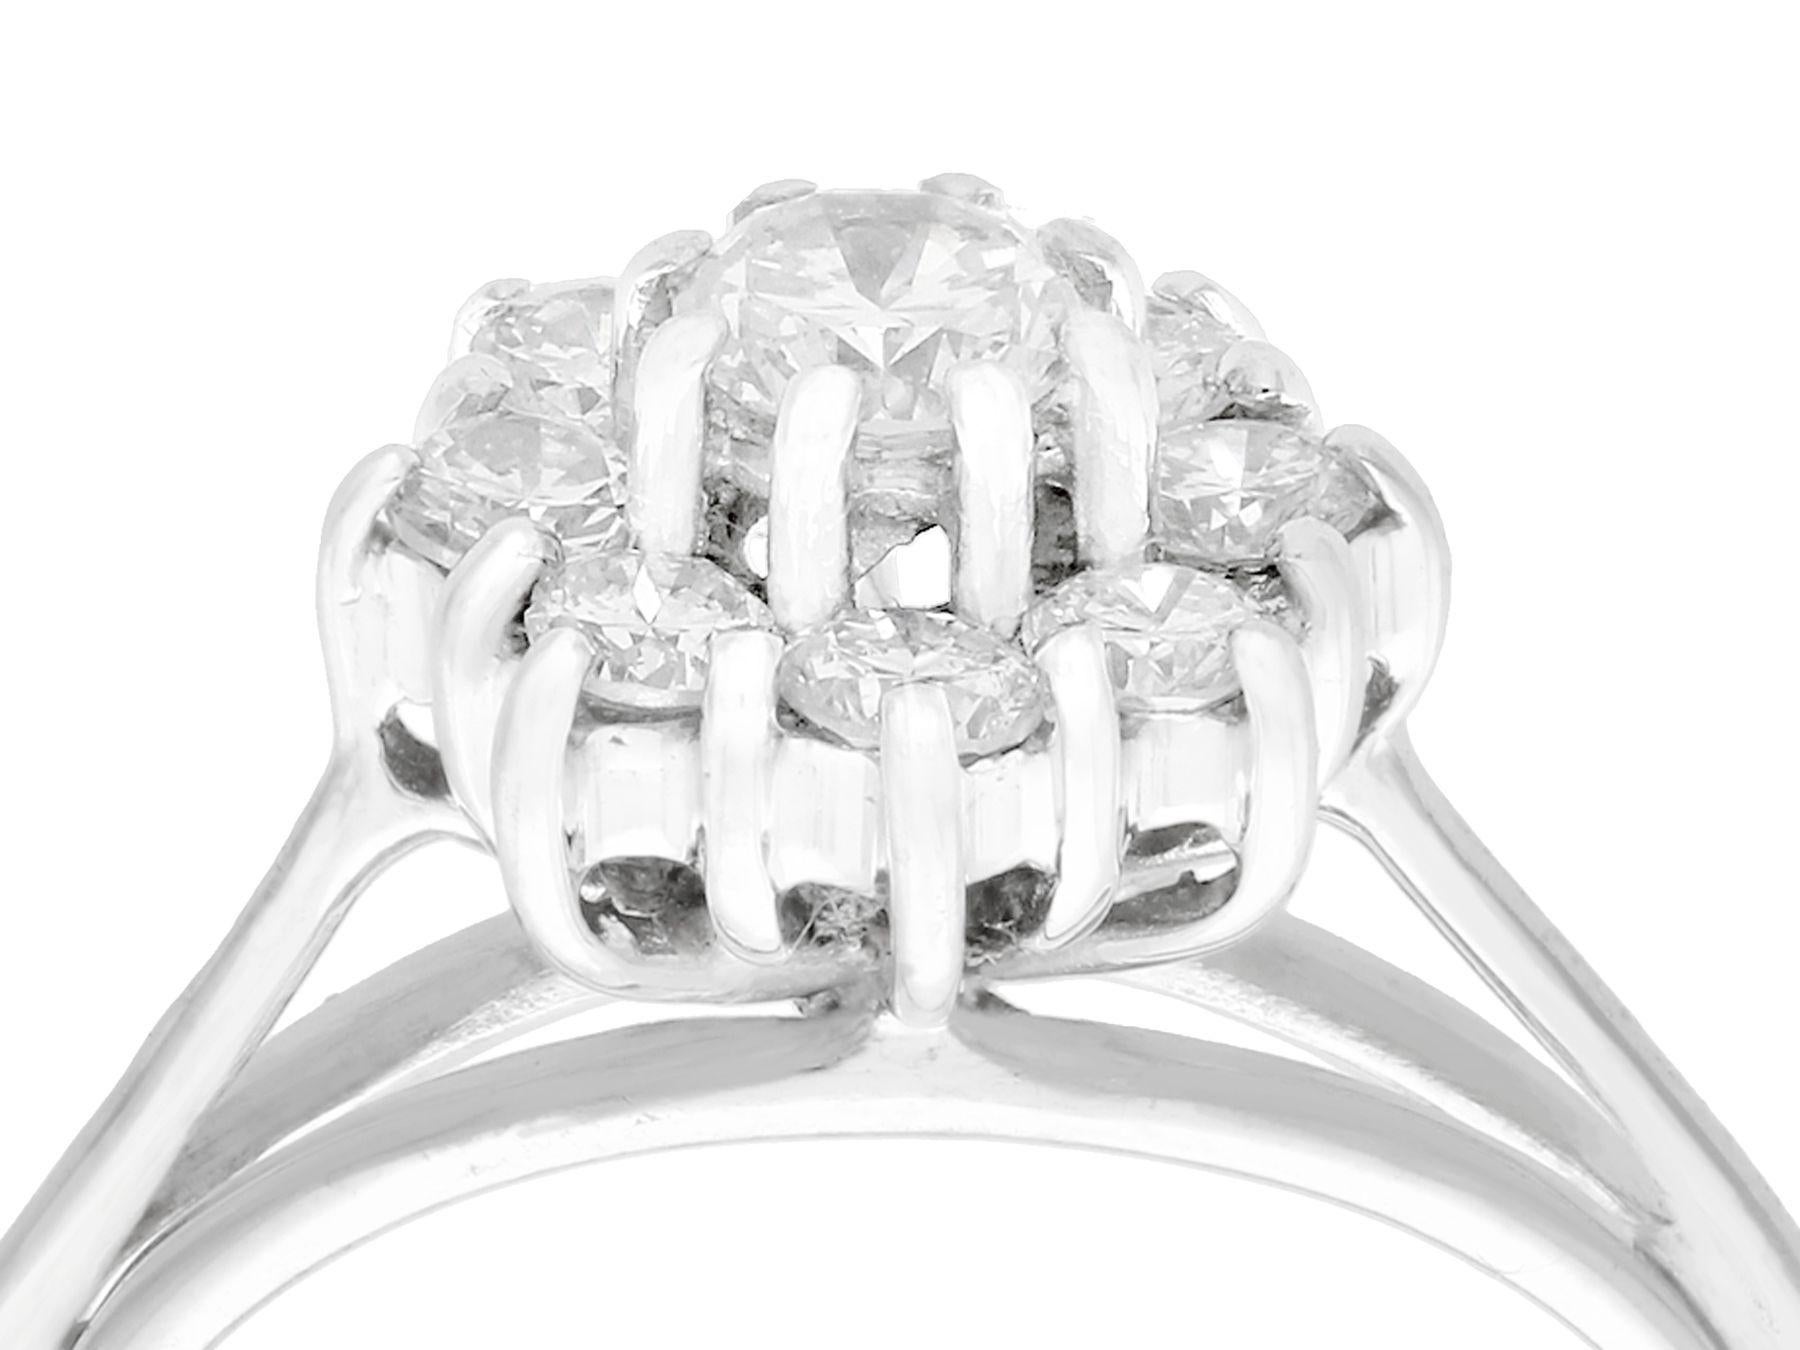 An impressive vintage 1960s 0.76 carat diamond and 18 karat white gold cluster style cocktail ring; part of our diverse vintage jewelry and estate jewelry collections

This fine and impressive vintage diamond ring has been crafted in 18k white